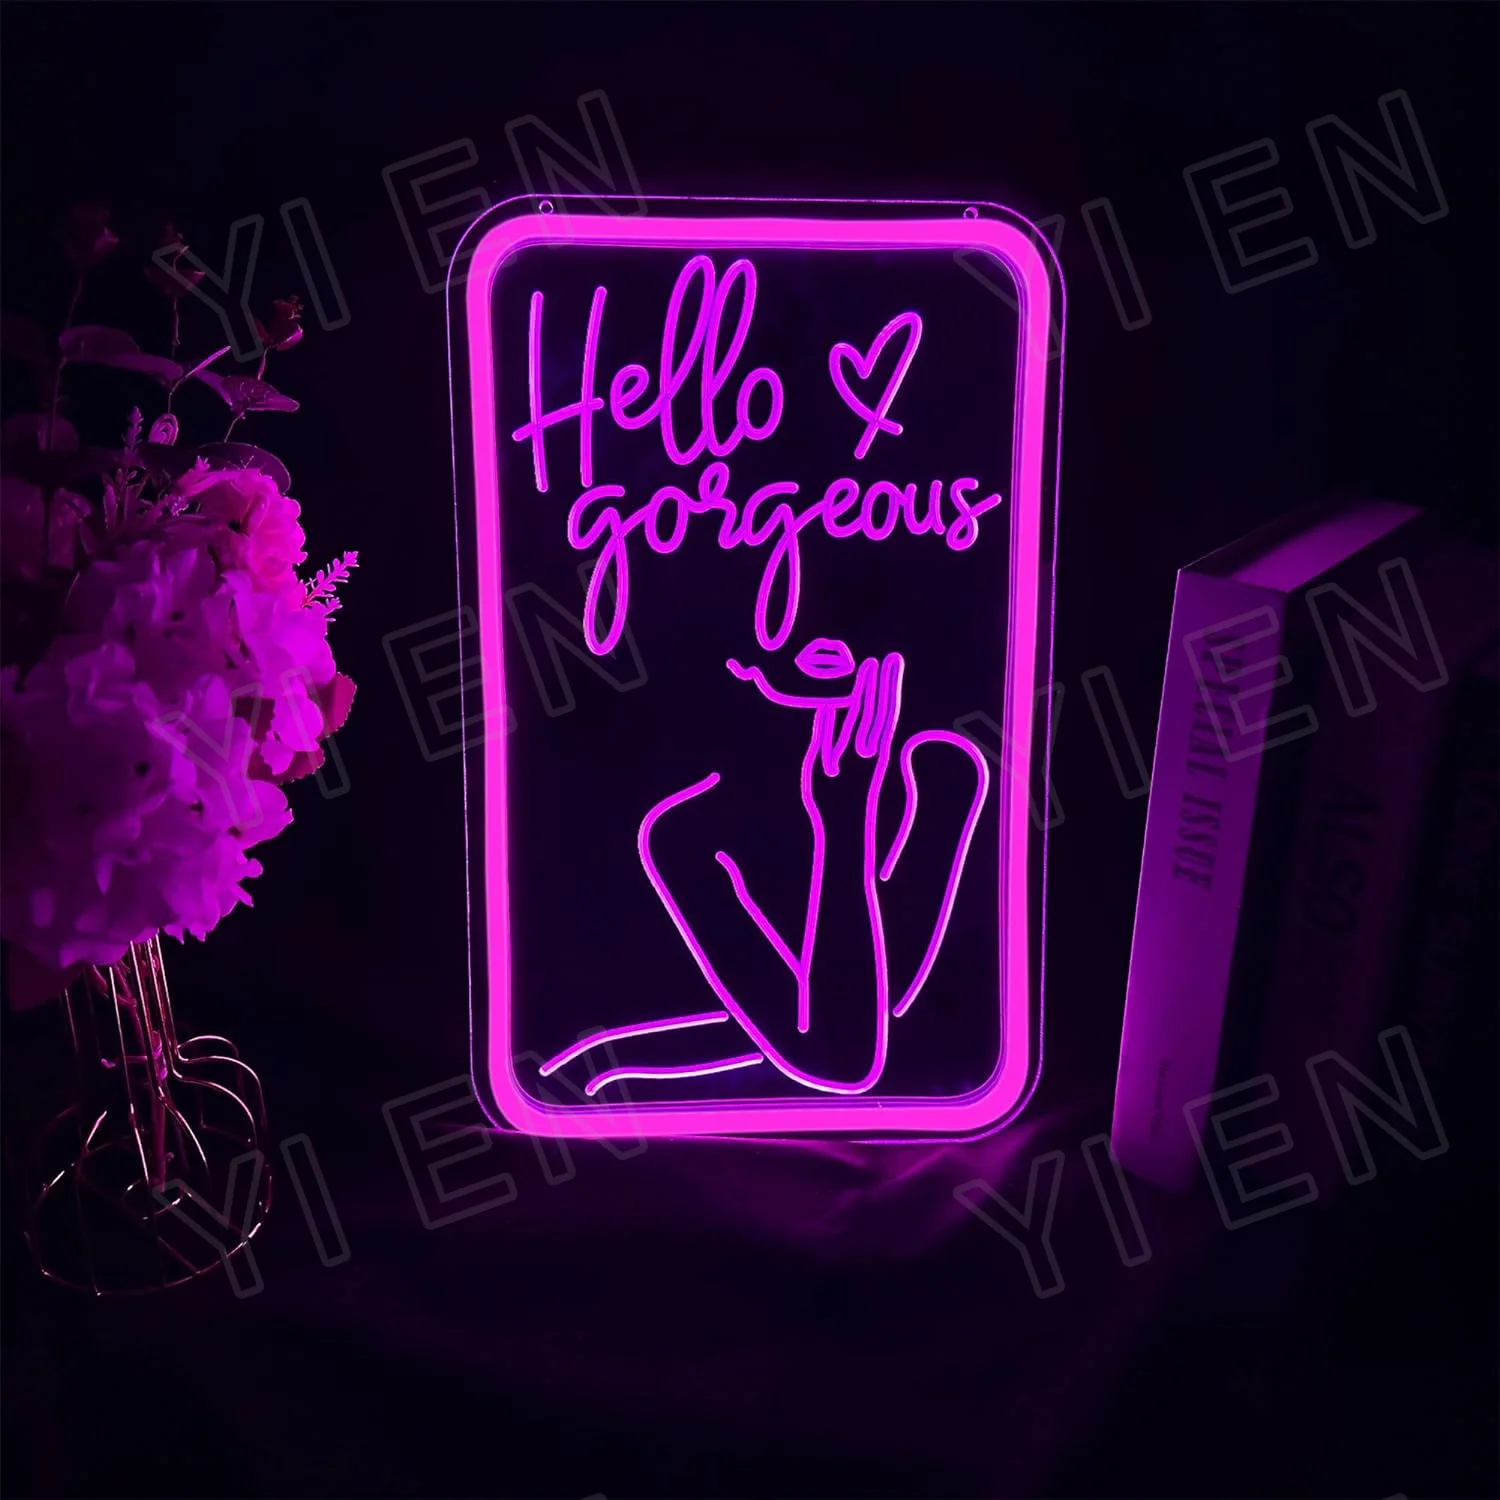 

3D Hello Gorgeous Neon Sign for Wall Decor, LED Neon Lights Party Decorations, USB Powered Switch Adjustable Brightness LED Neon